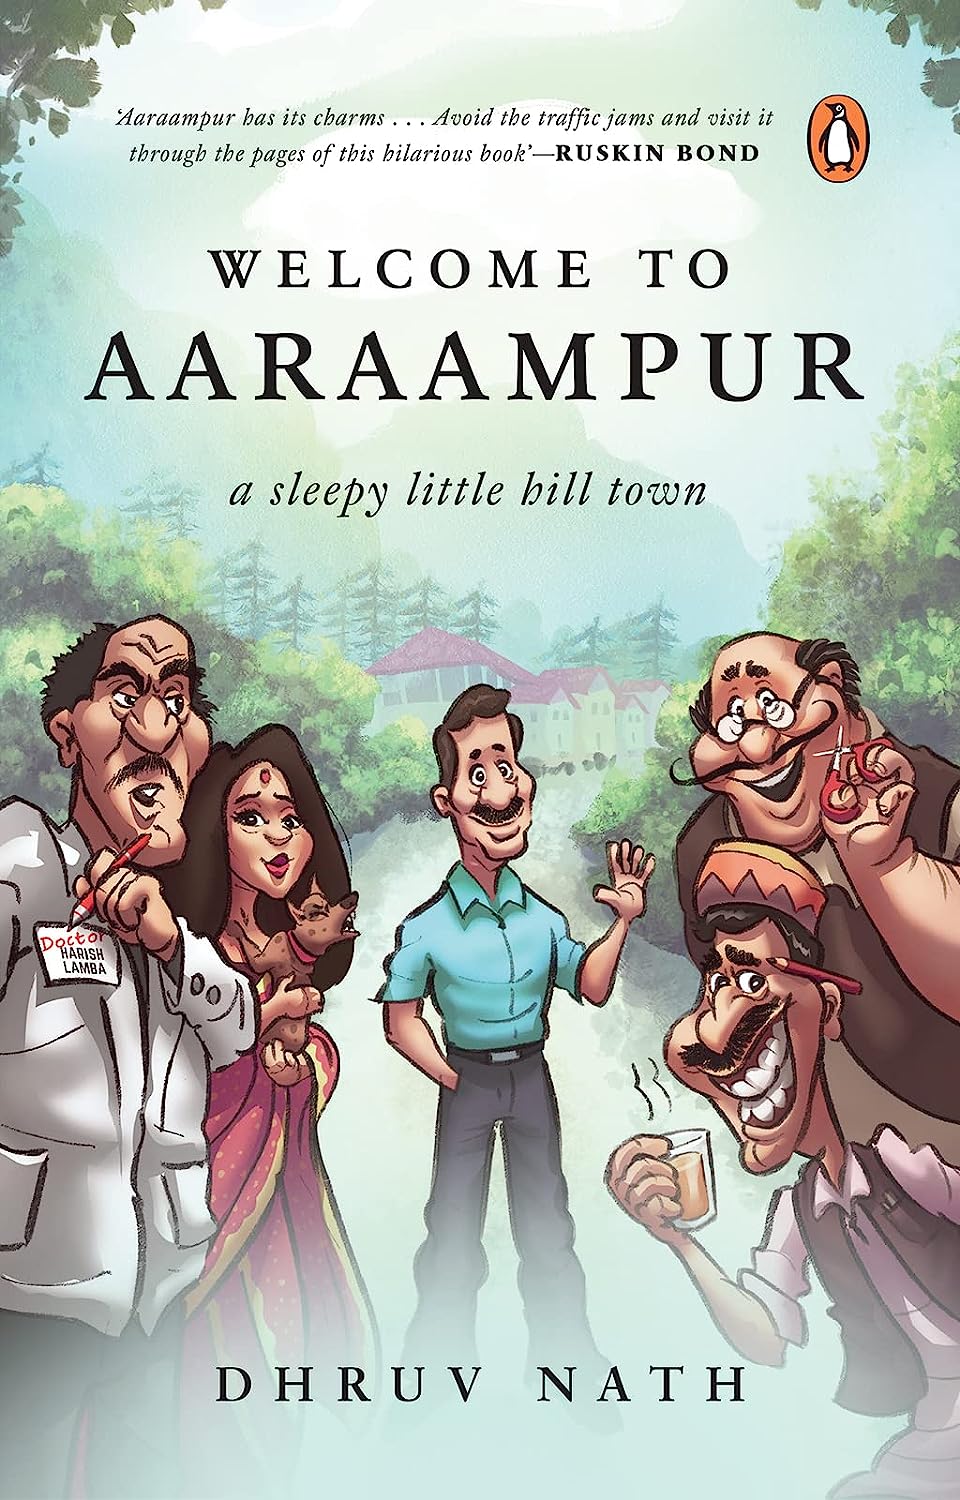 "Welcome to Aaraampur": This captivating fiction will take you on a delightful journey to a small hill town